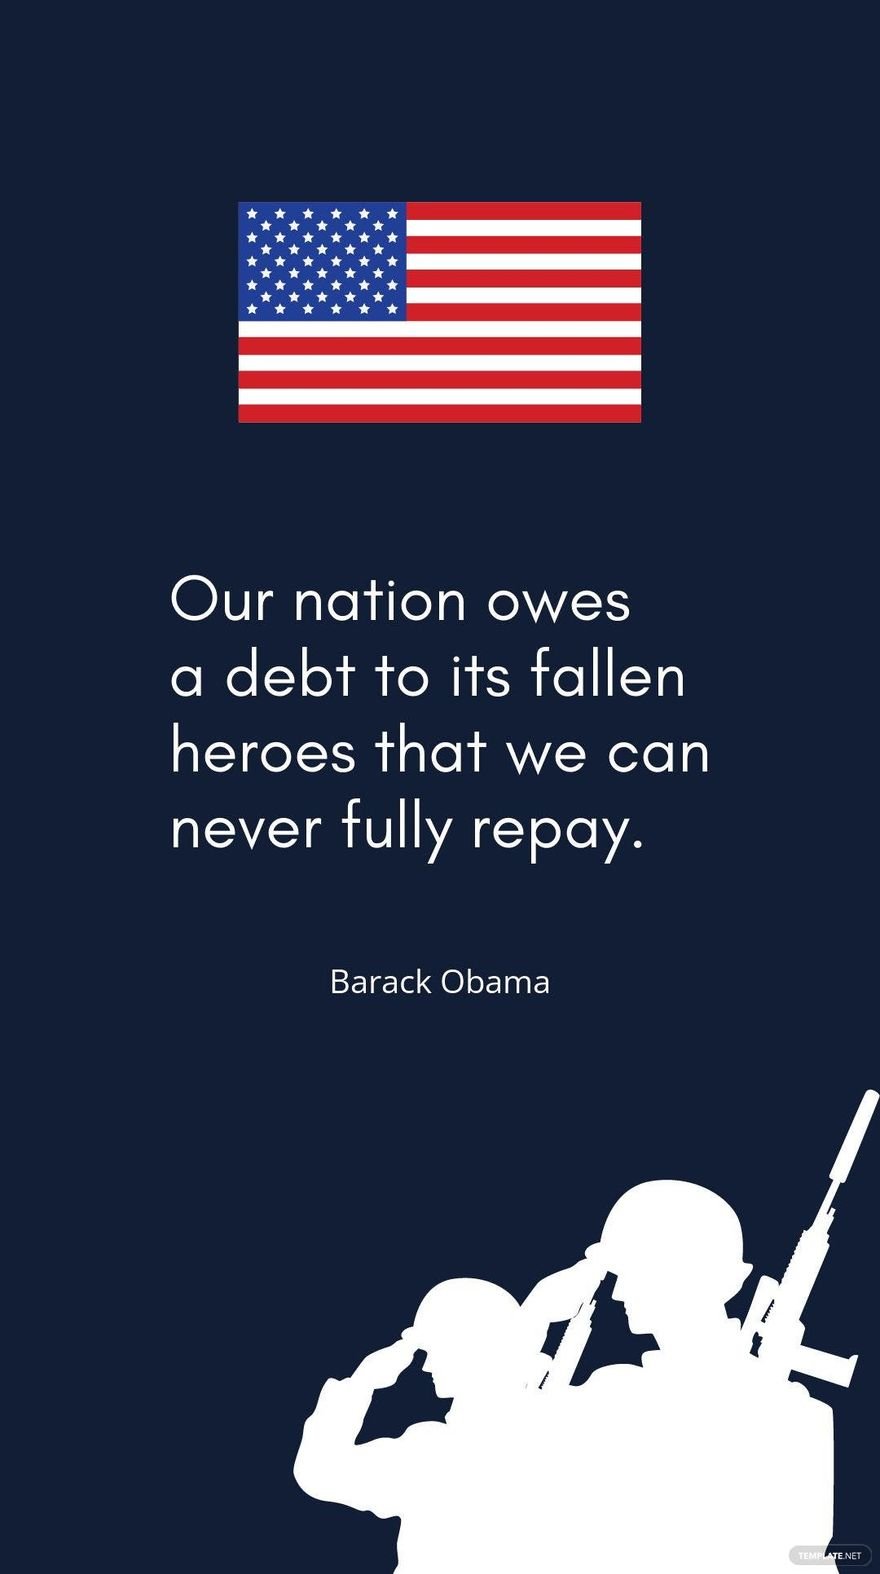 Barack Obama - Our nation owes a debt to its fallen heroes that we can never fully repay. in JPG